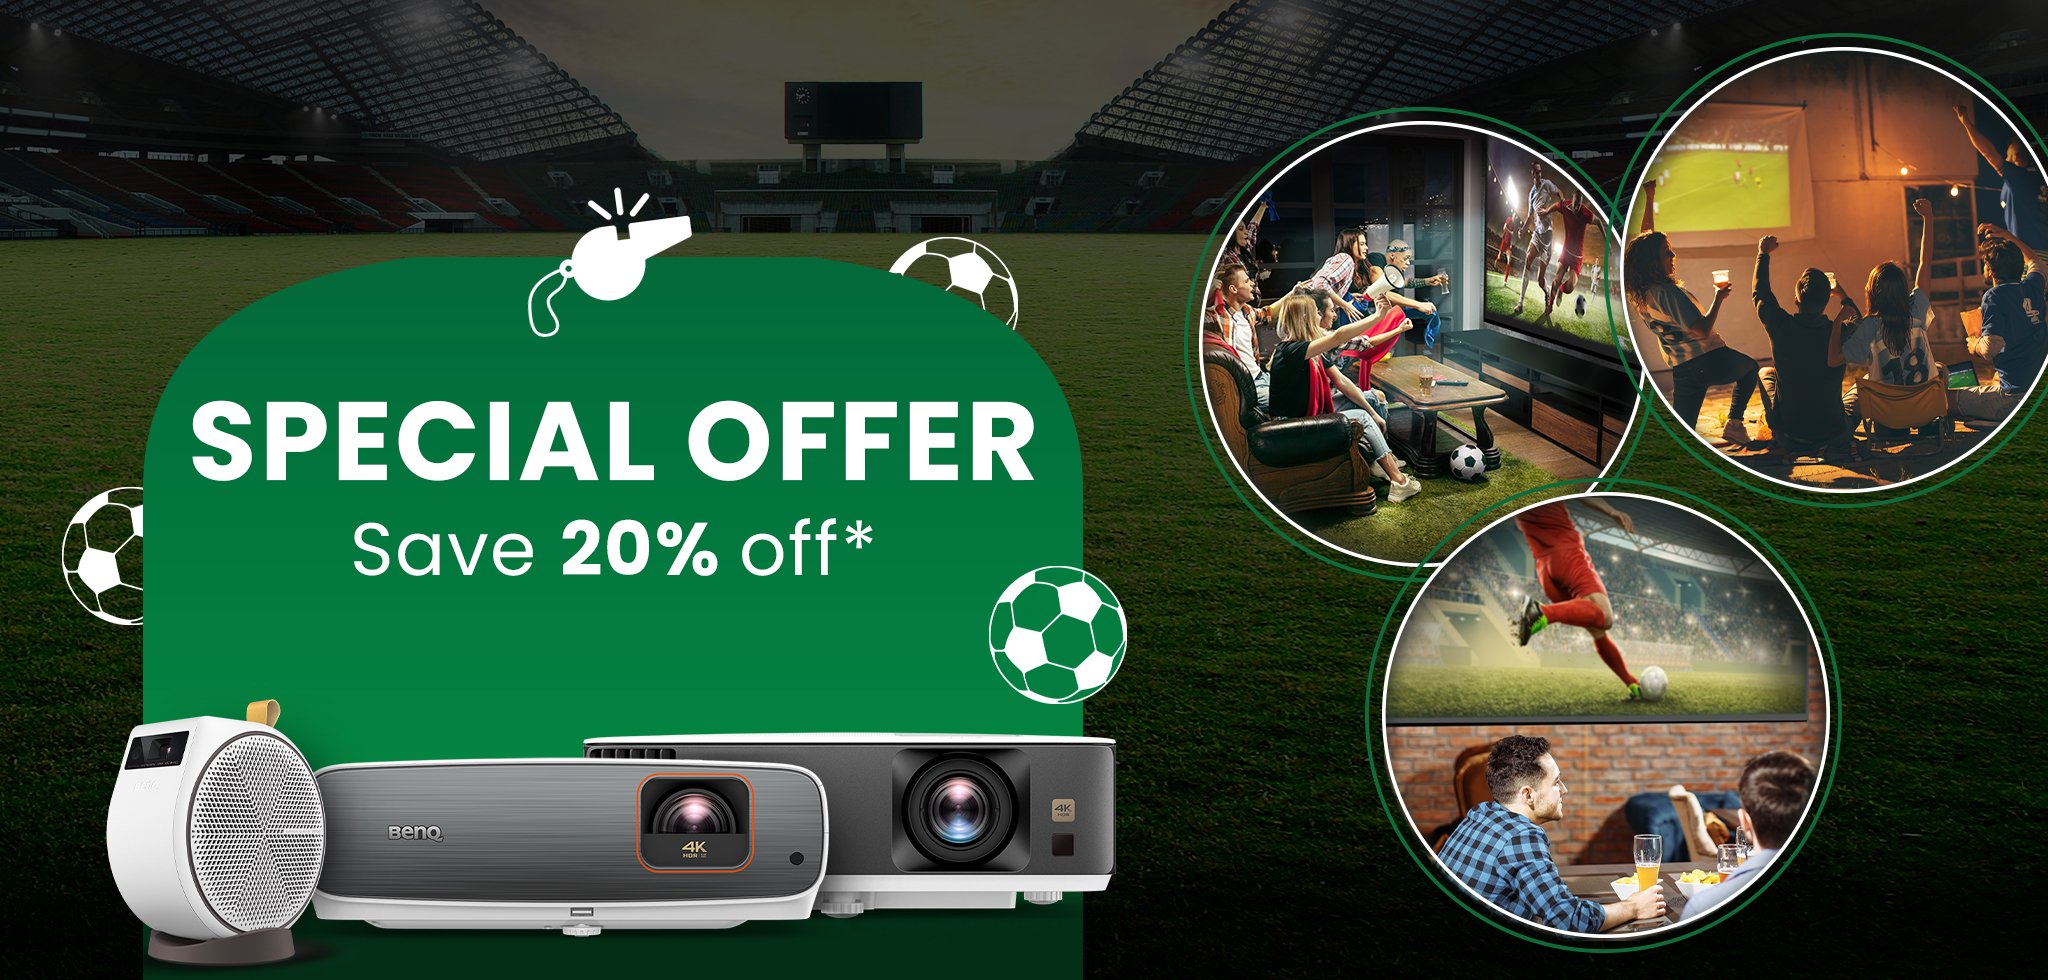 Experience beyond the Stadium. Immerse yourself in big-screen sports viewing with BenQ